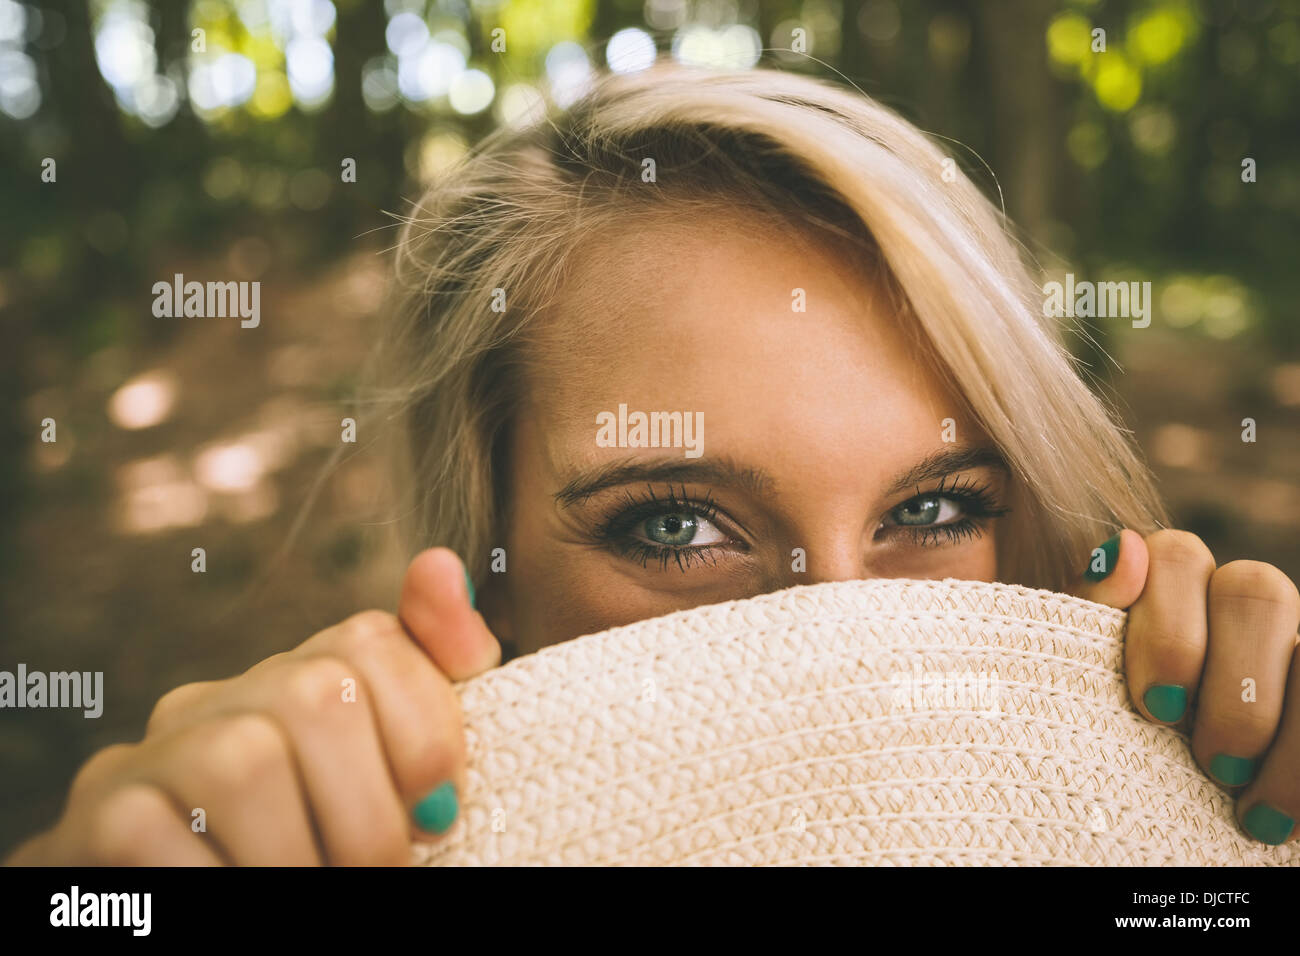 Happy gorgeous blonde holding straw hat in front of her face Stock Photo